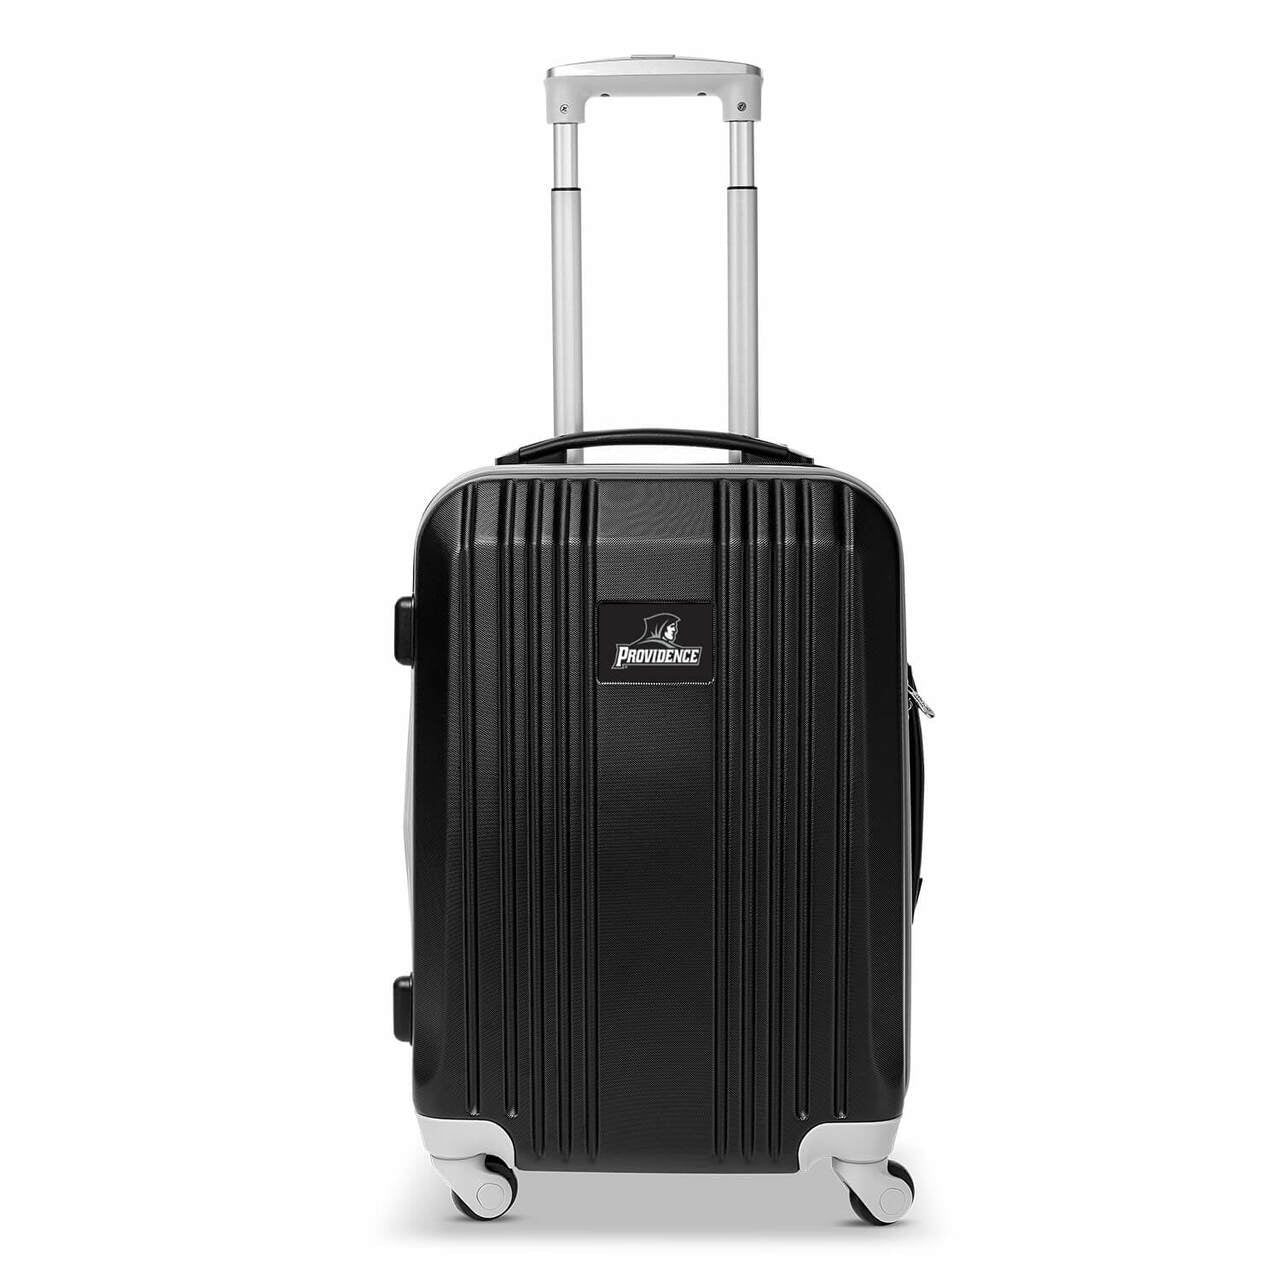 Providence Carry On Spinner Luggage | Providence Hardcase Two-Tone Luggage Carry-on Spinner in Gray